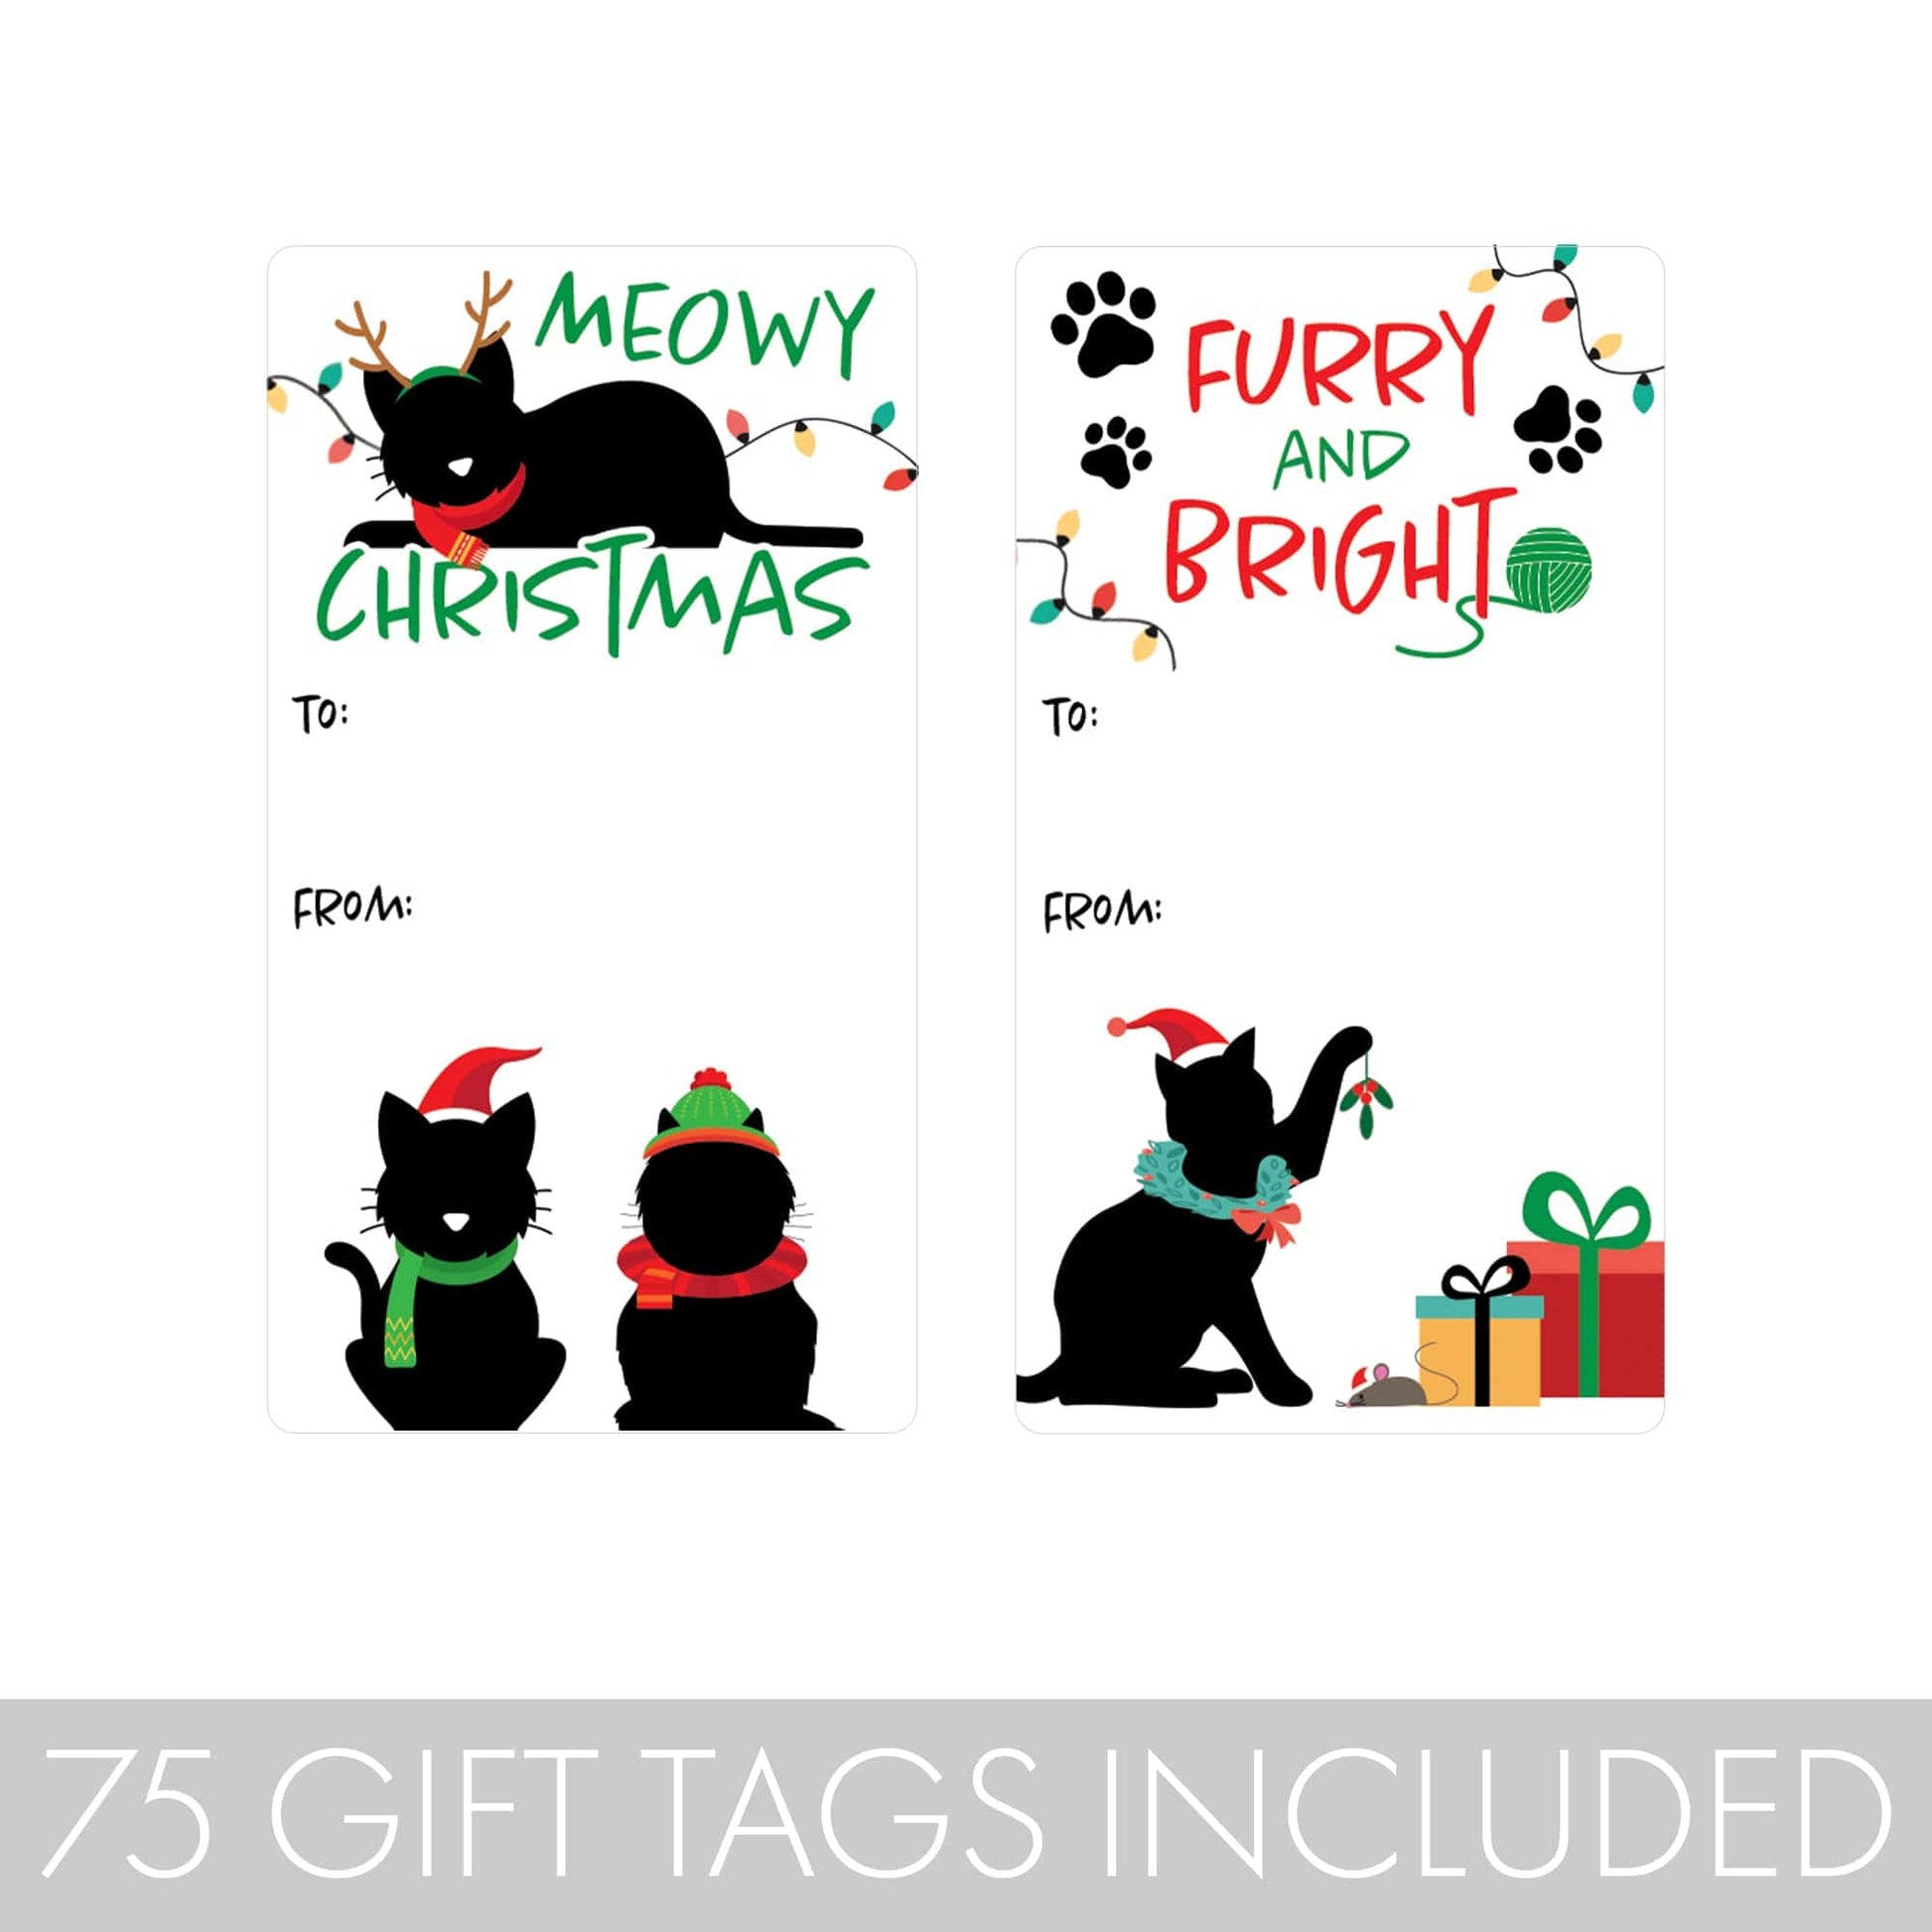 Cat Christmas Gift Tag Stickers - Meowy Christmas Kitten Gift Wrap Labels - 75 Count